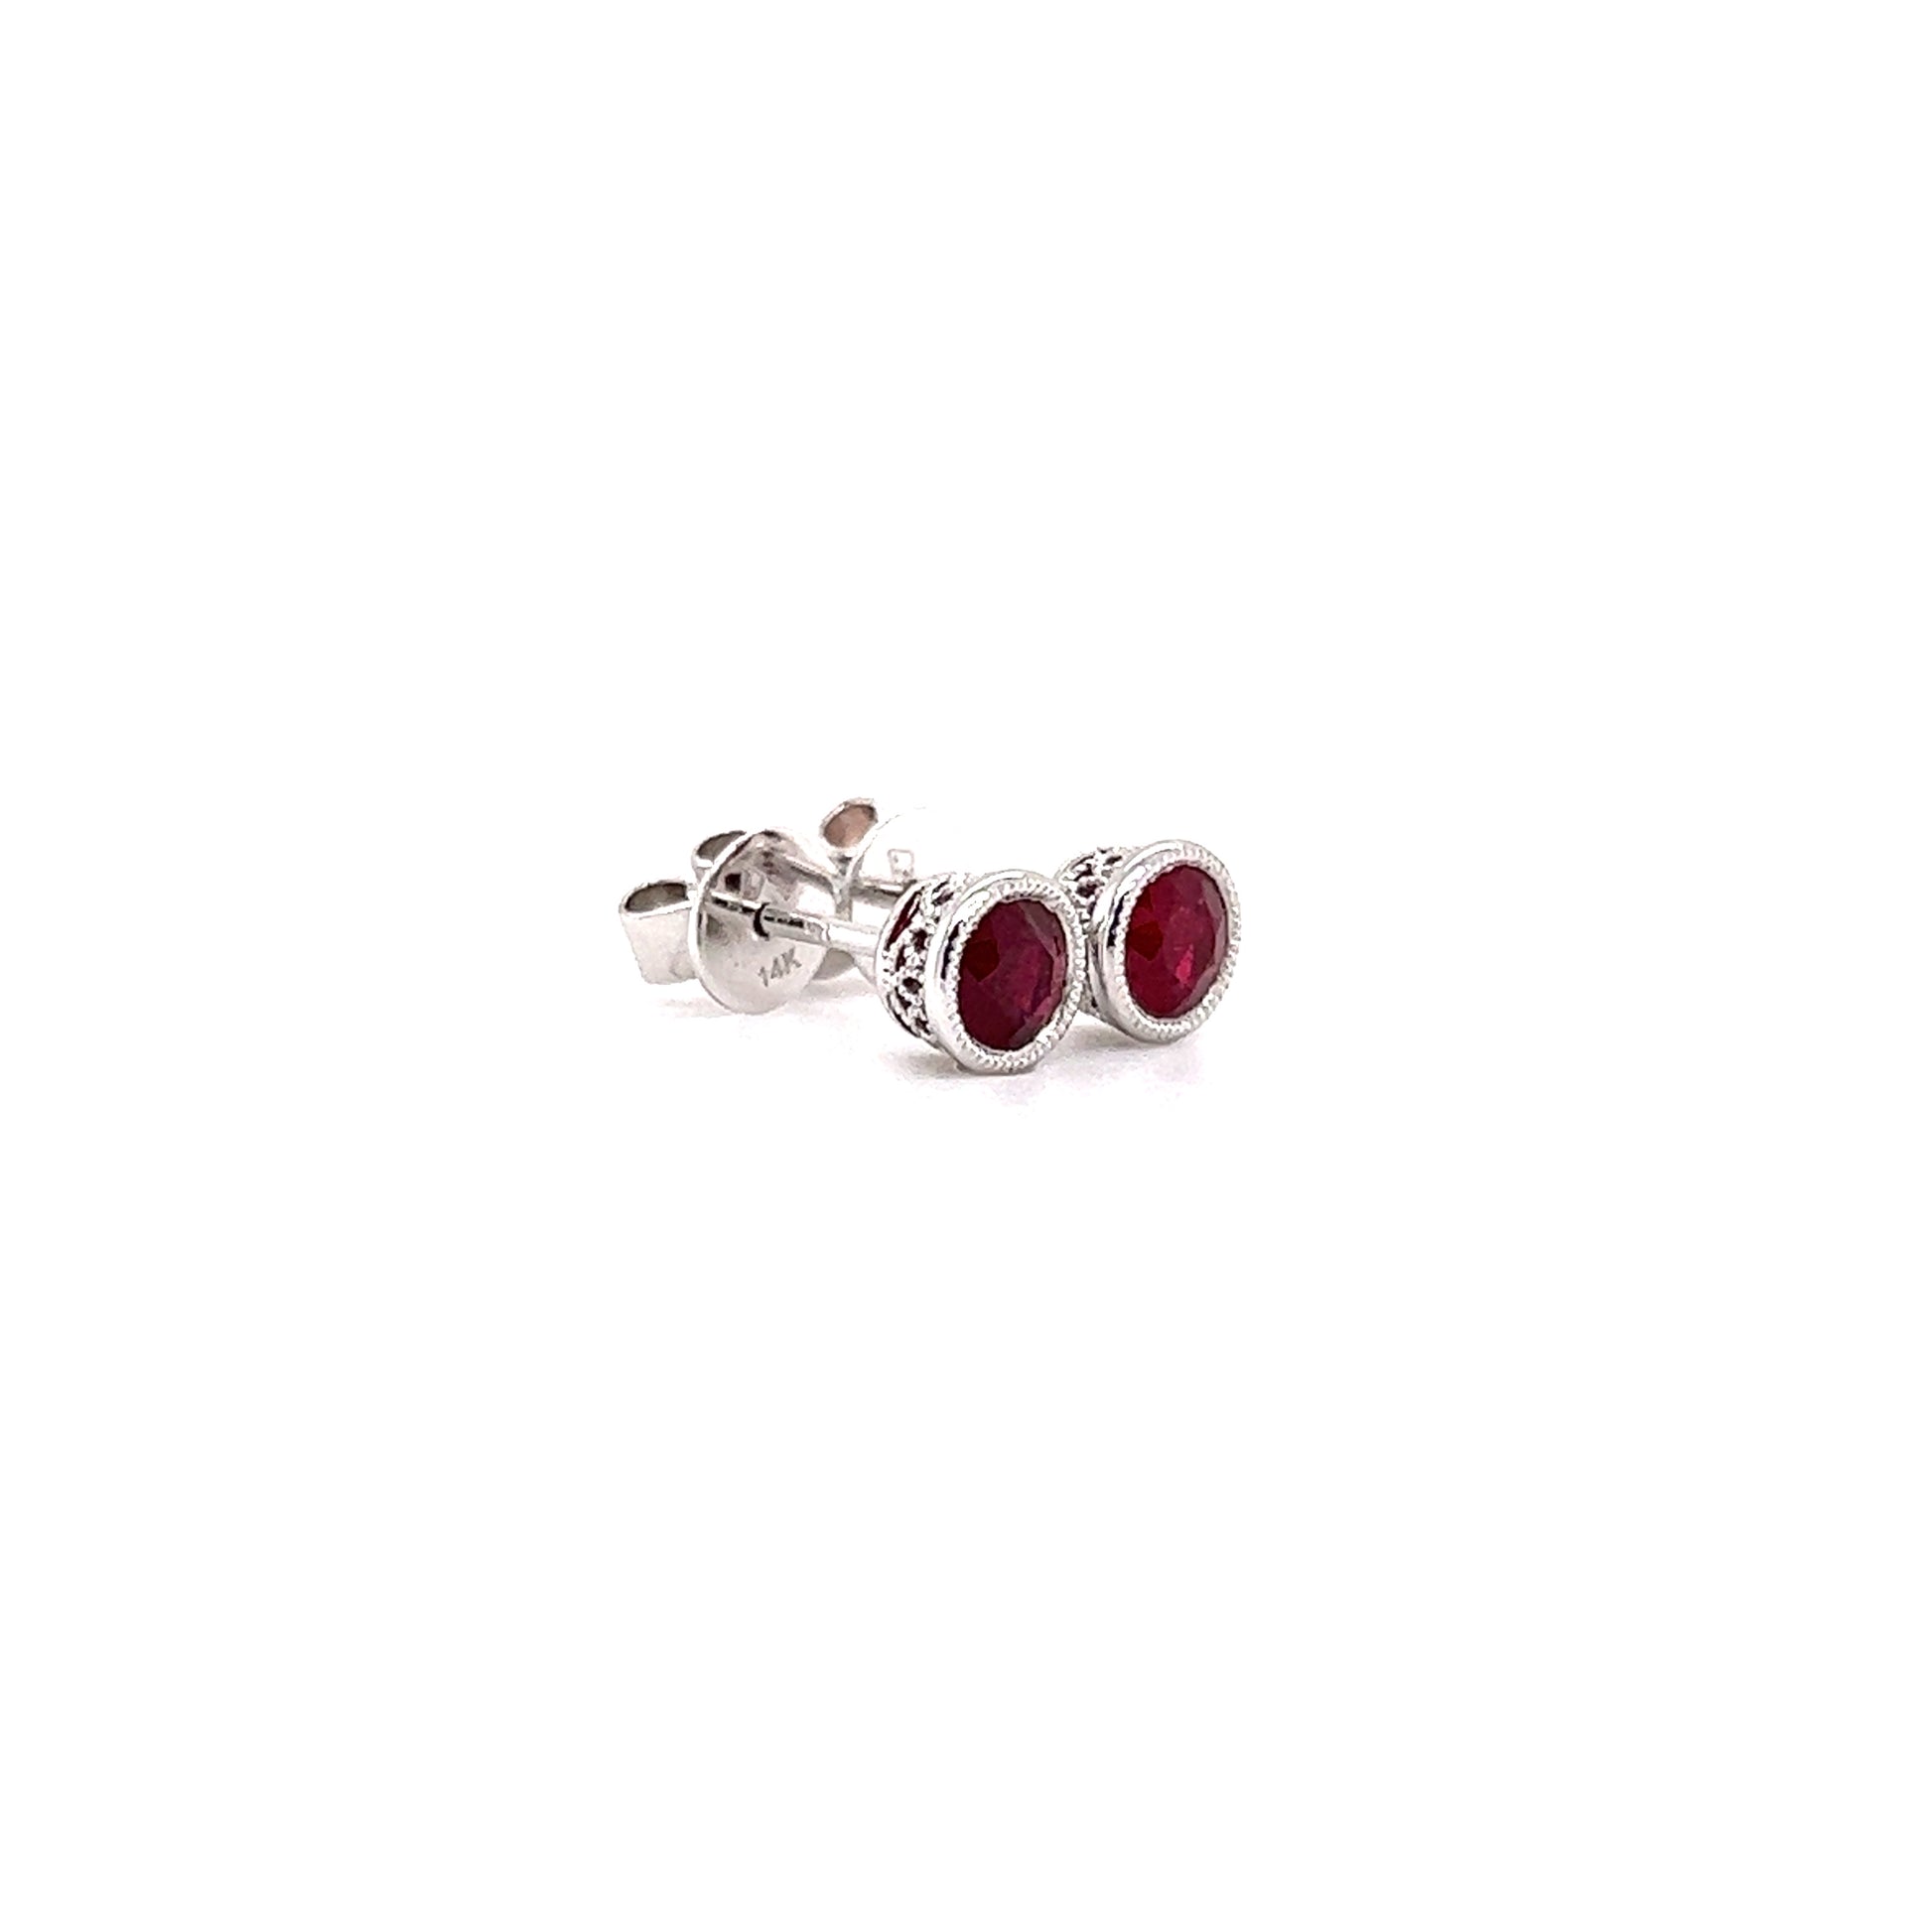 Round Ruby Stud Earrings with Filigree and Milgrain Details in 14K White Gold Left Side View